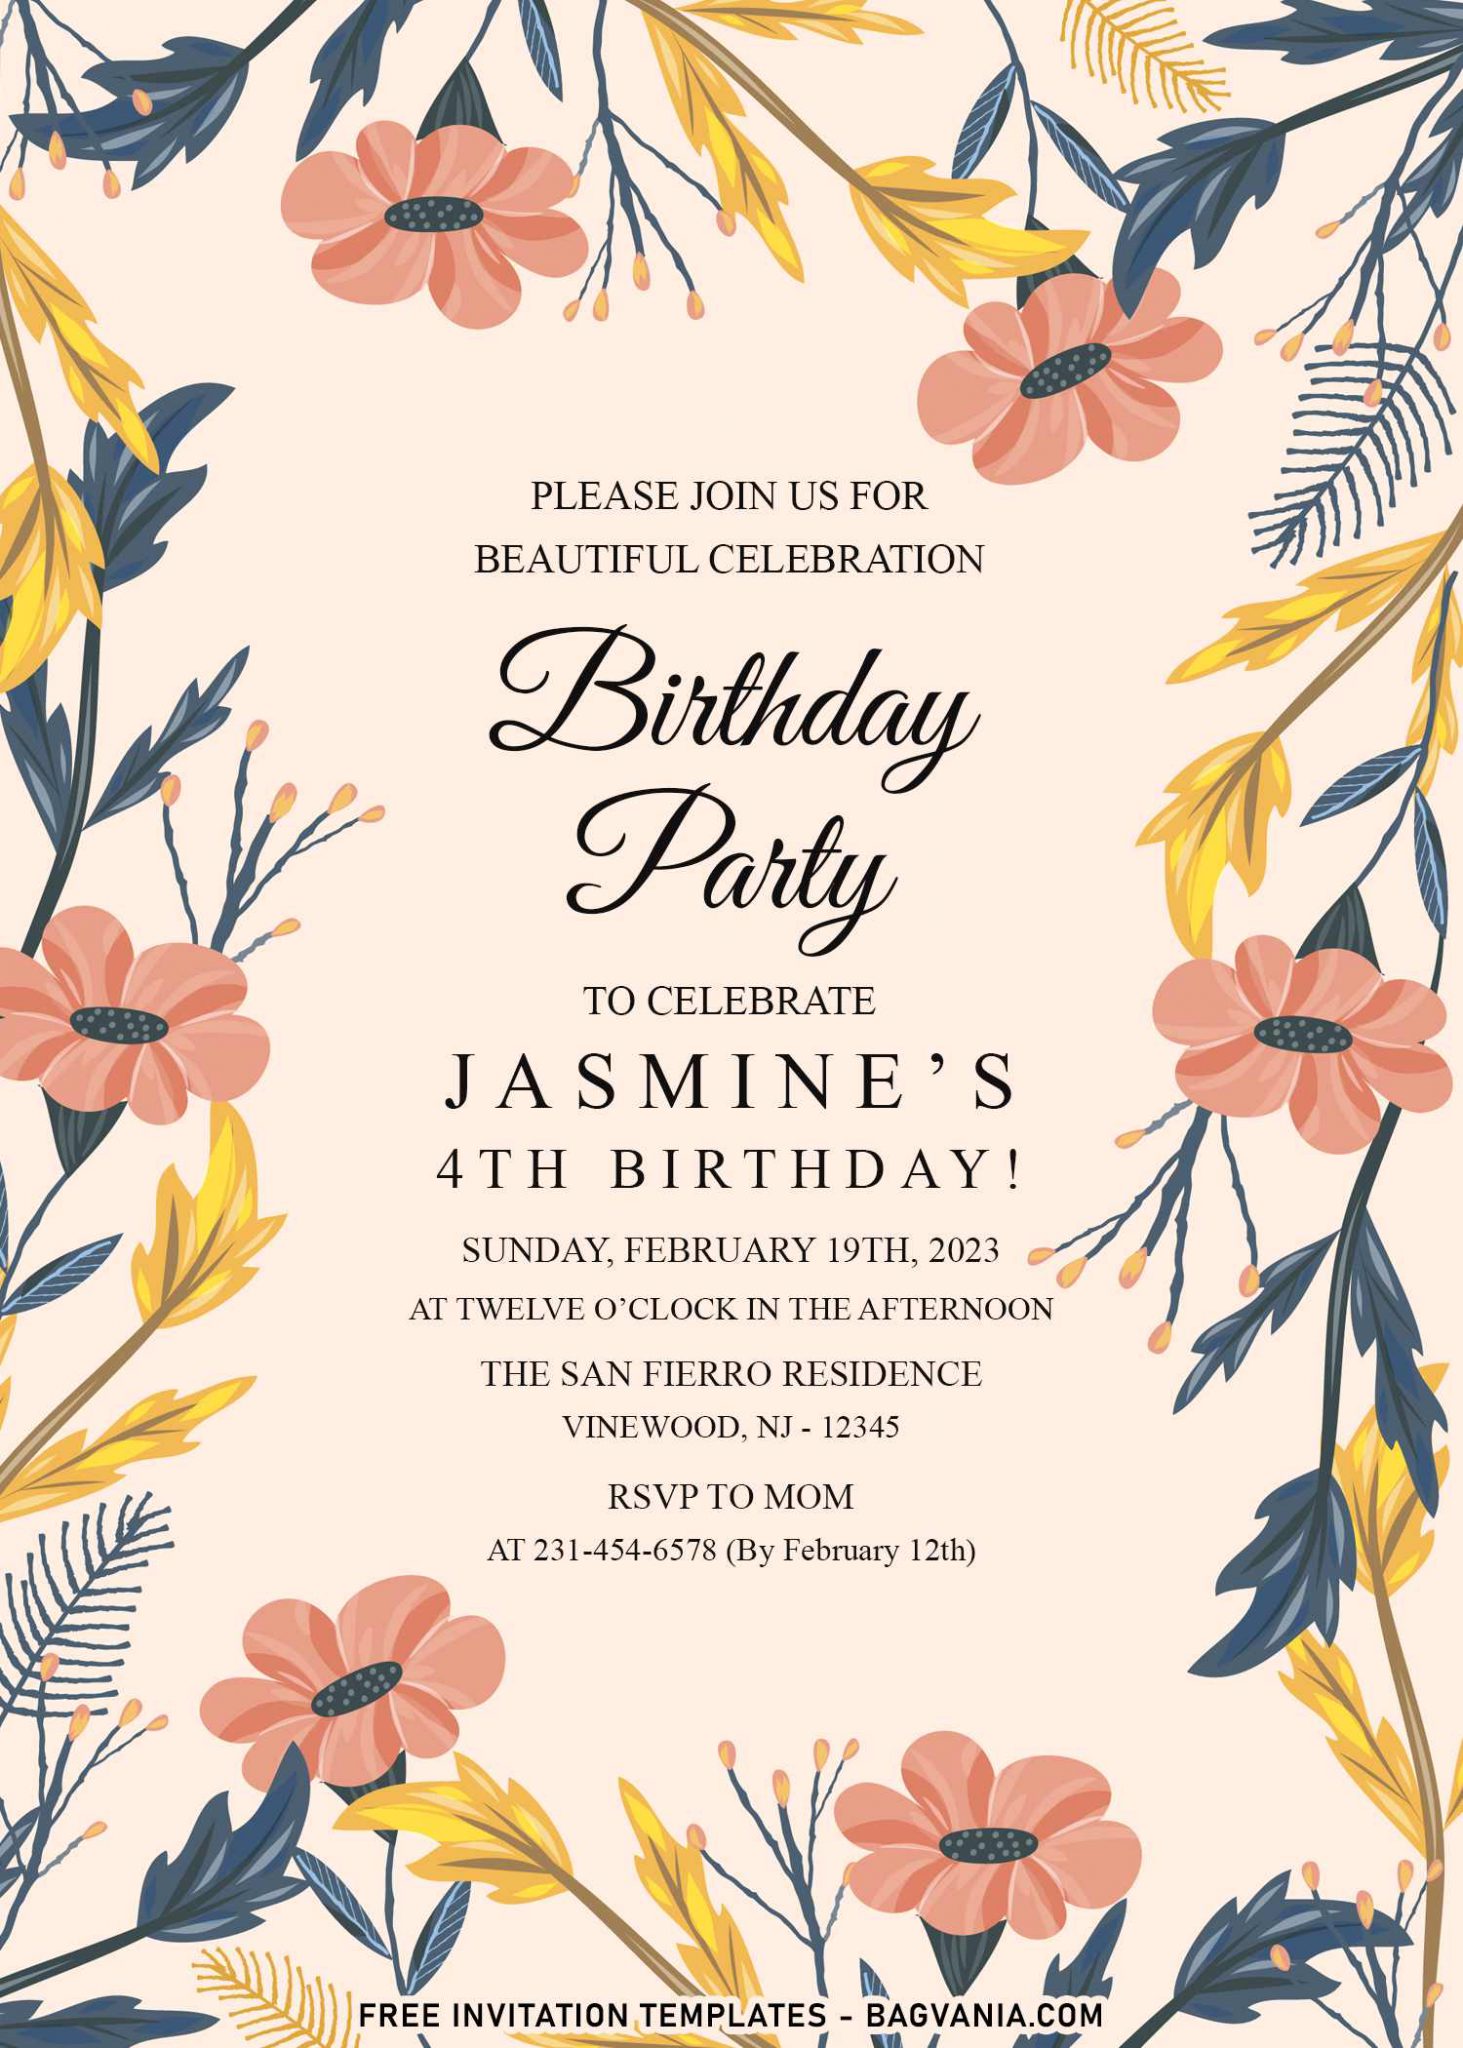 7-aesthetic-spring-inspired-birthday-invitation-templates-for-your